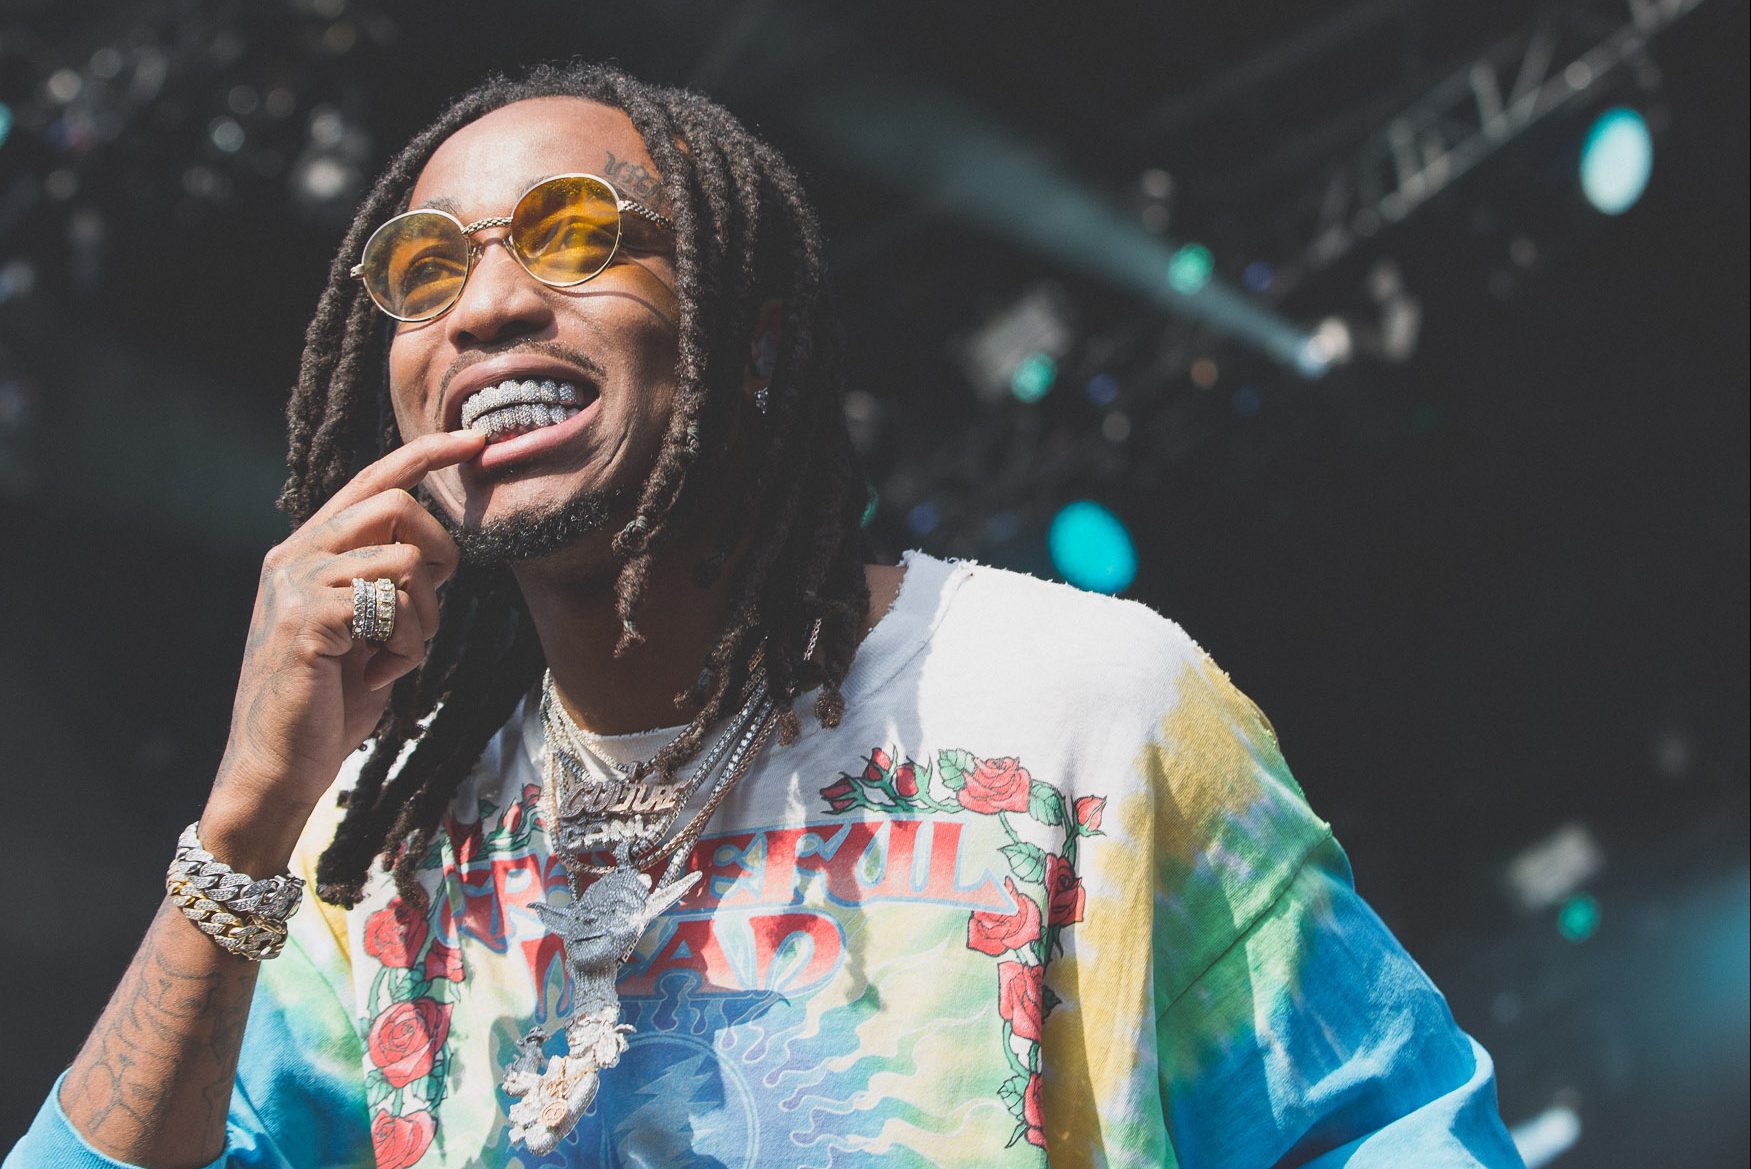 Twitter Reacts To Quavo Revealing He Pays His Assistant $5K A Day